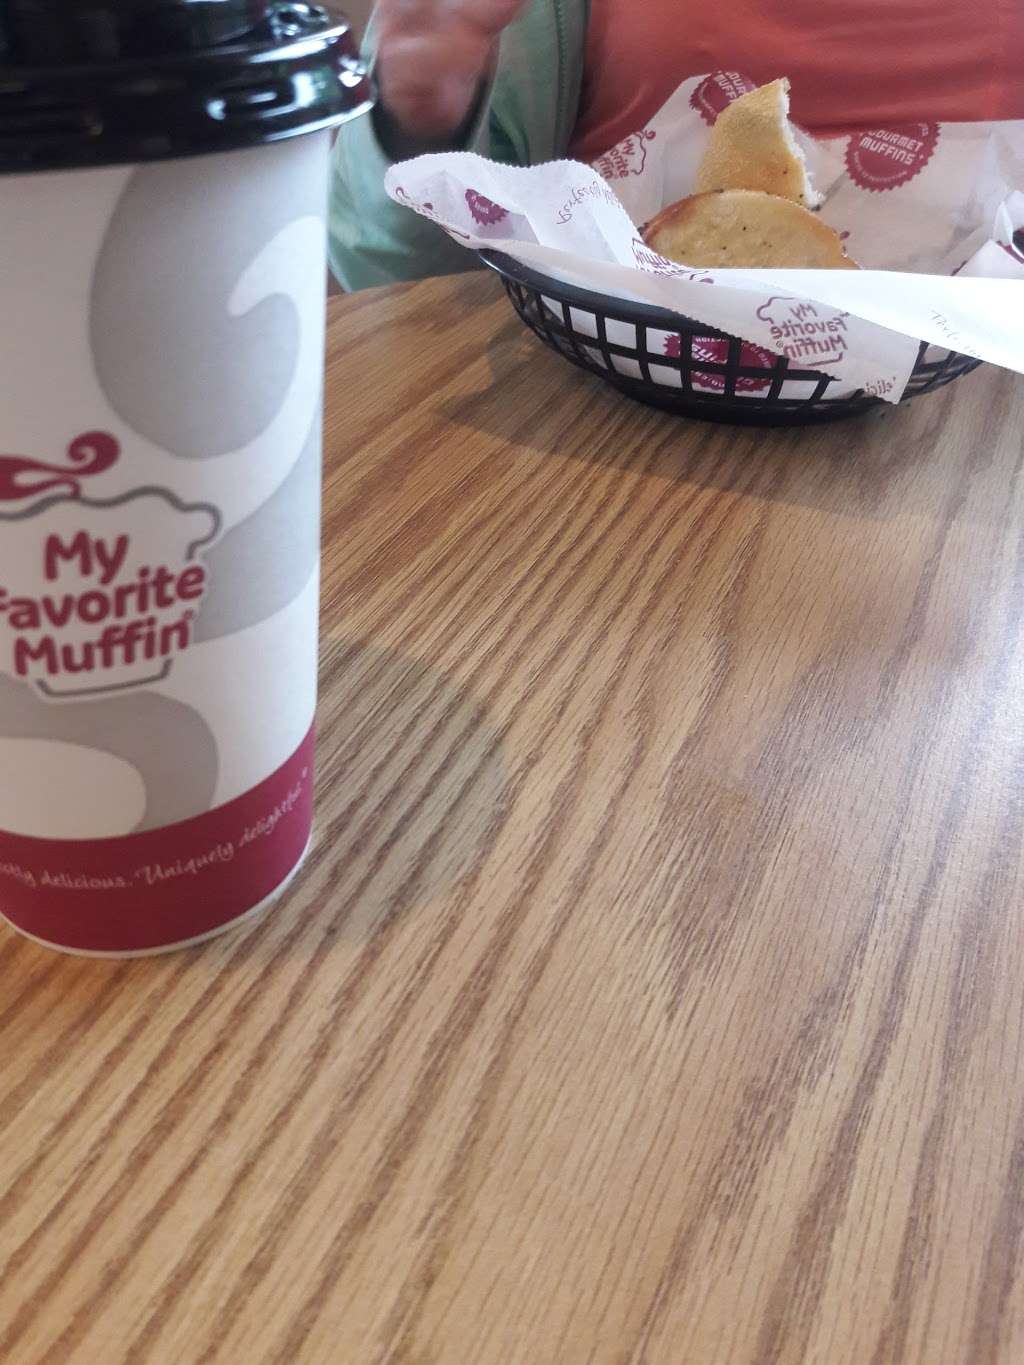 My Favorite Muffin | 1130 Valley Forge Rd, Valley Forge, PA 19482 | Phone: (610) 933-3393